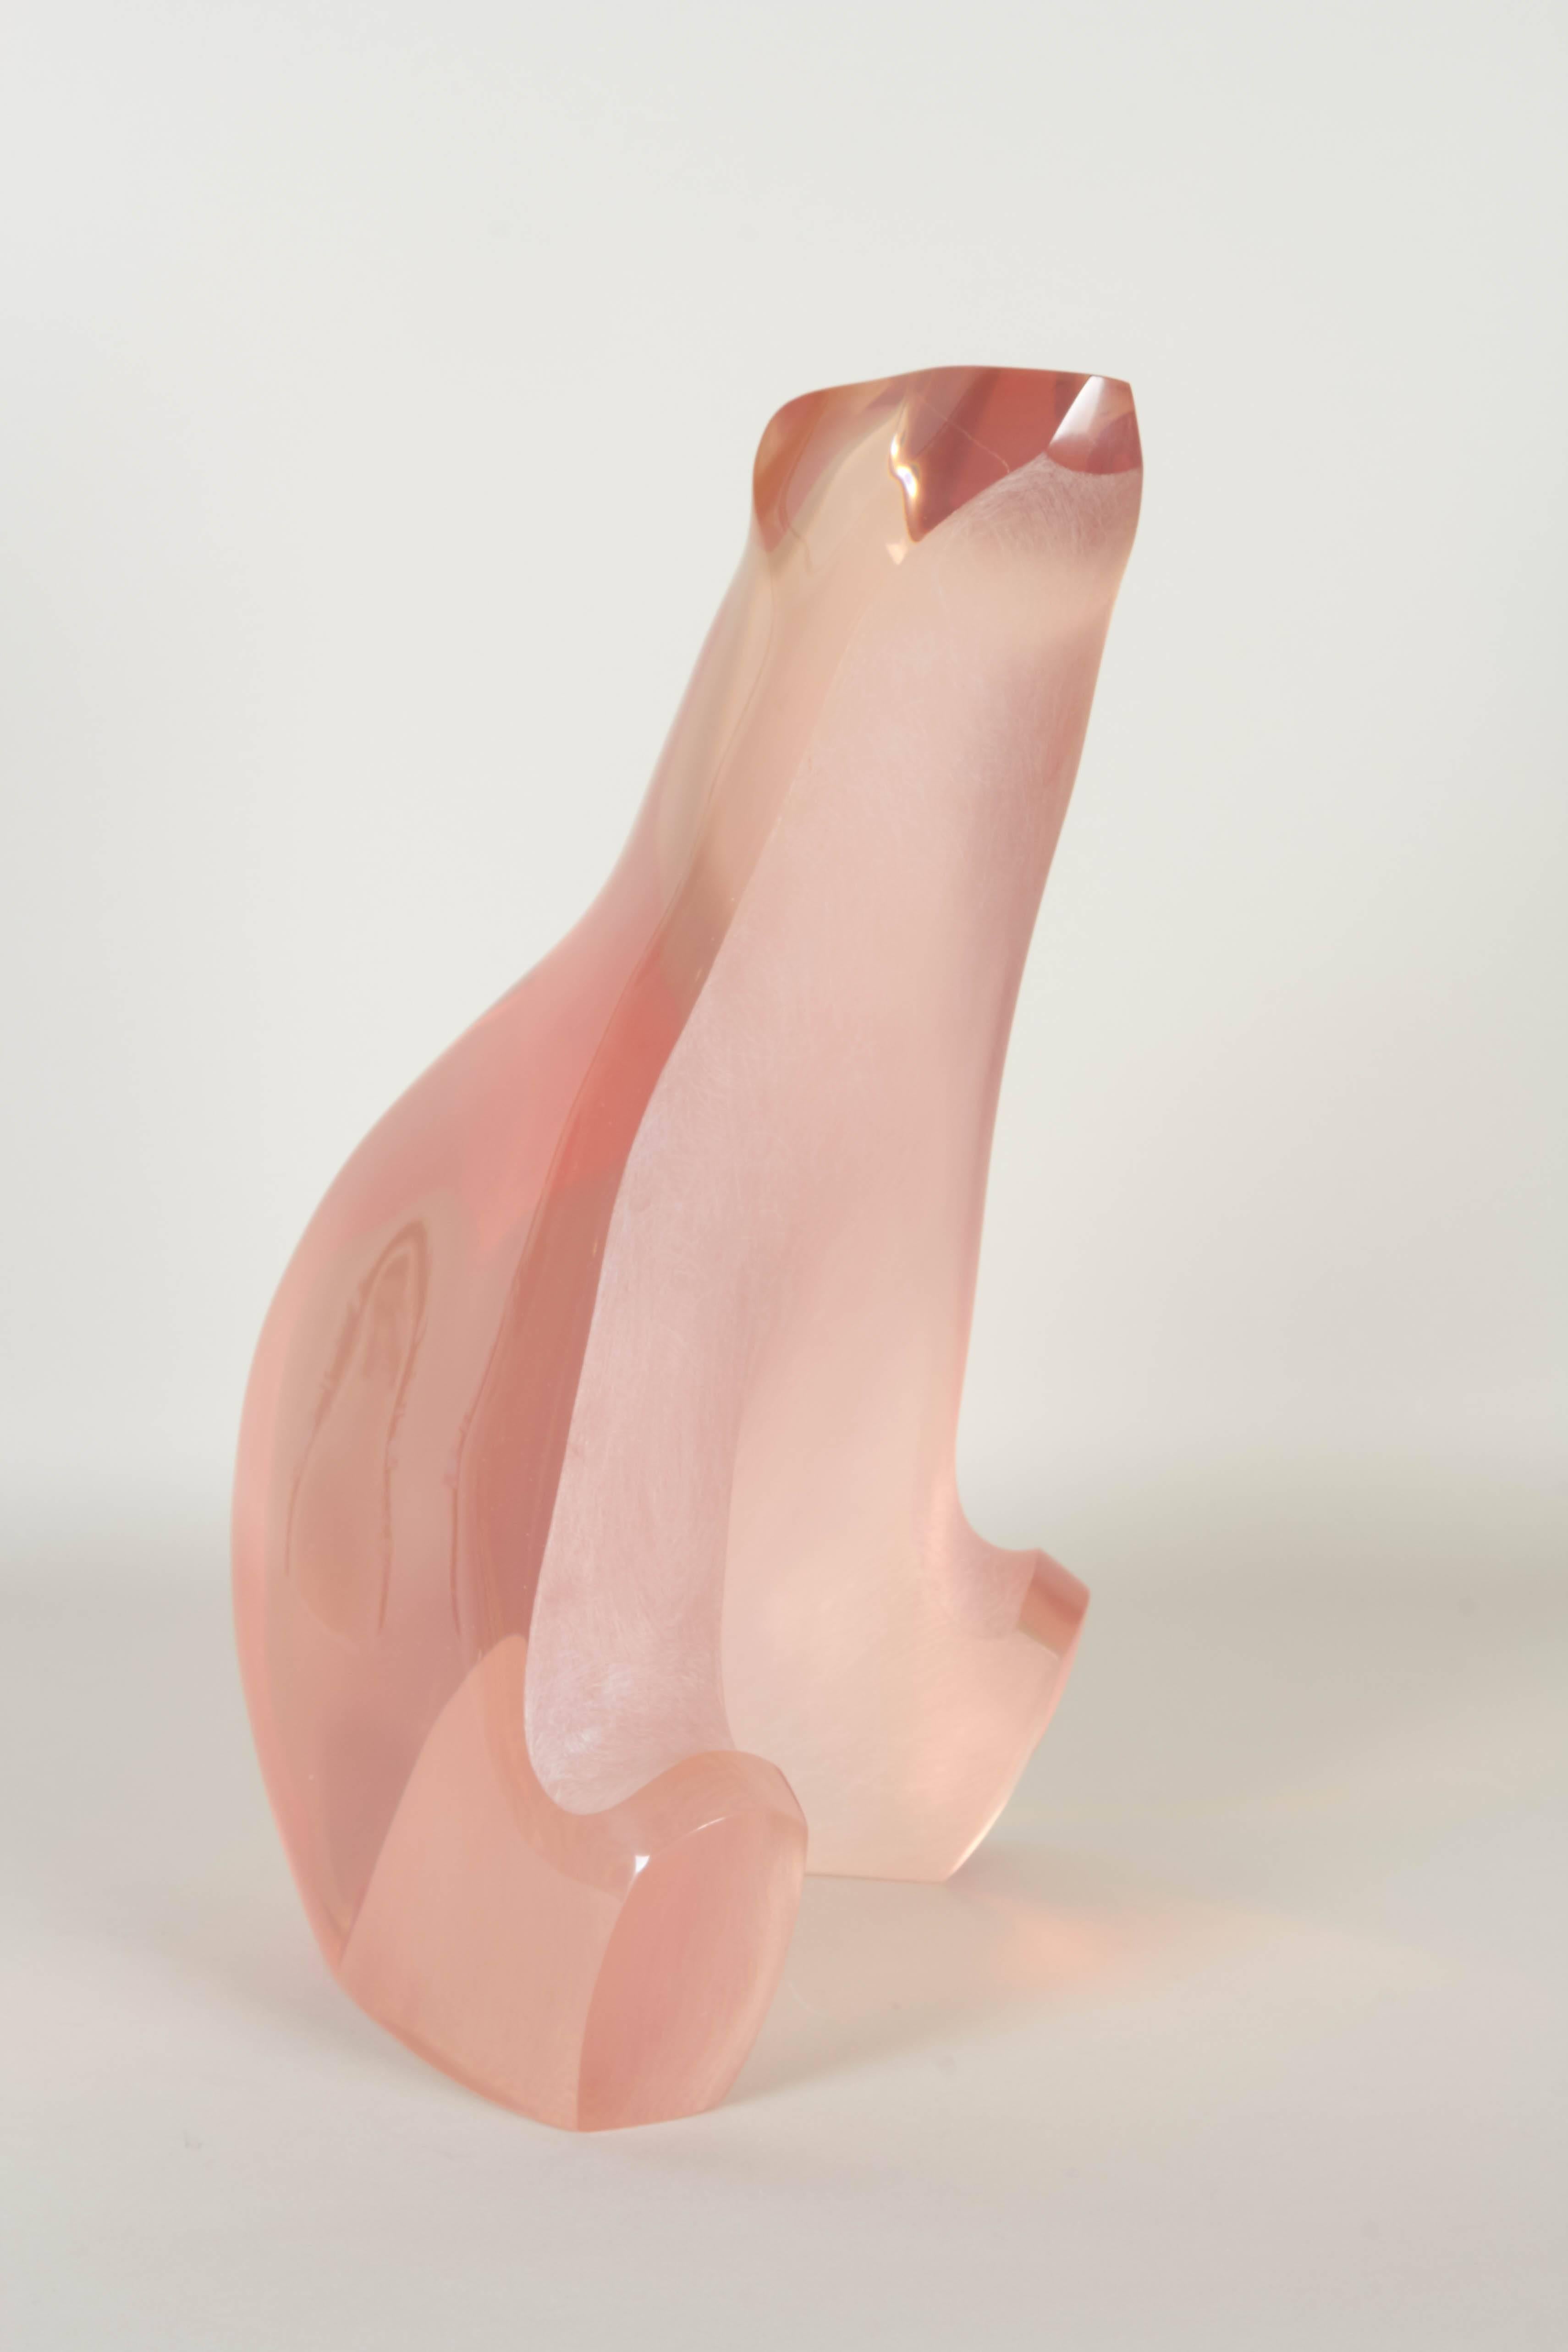 Modern Louis Von Koelnau 'Seated Bear' in Pink Lucite, Signed and Dated